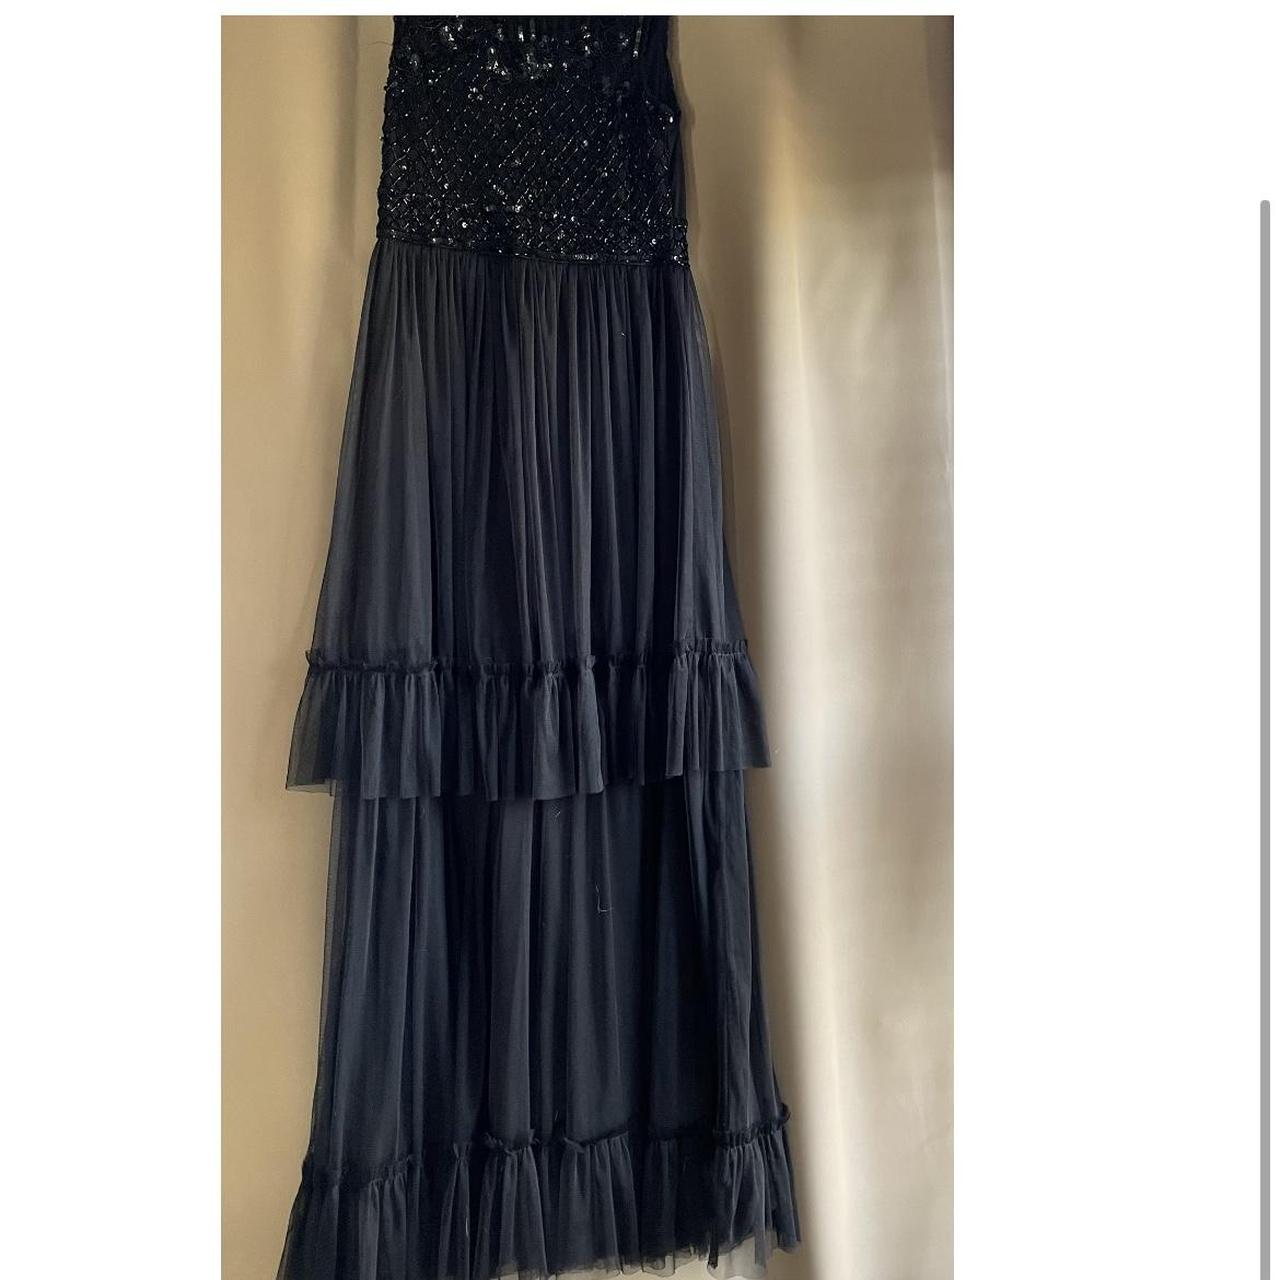 item listed by londonsfinds